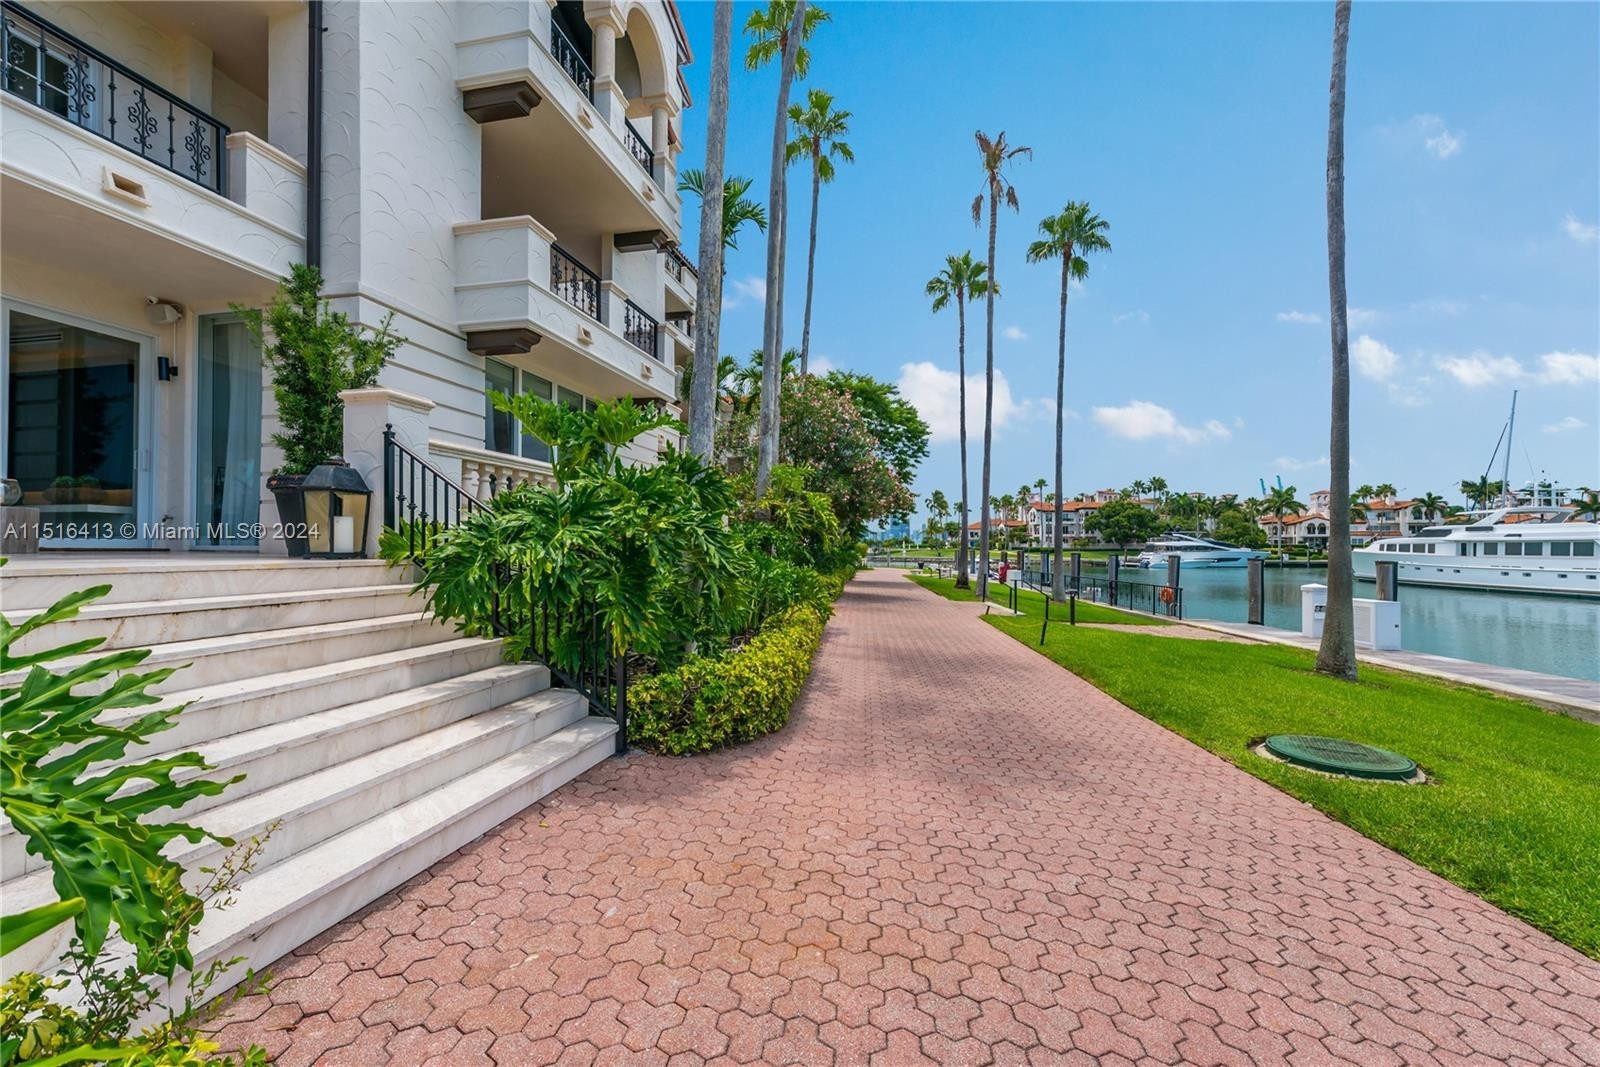 41. 2514 Fisher Island Dr